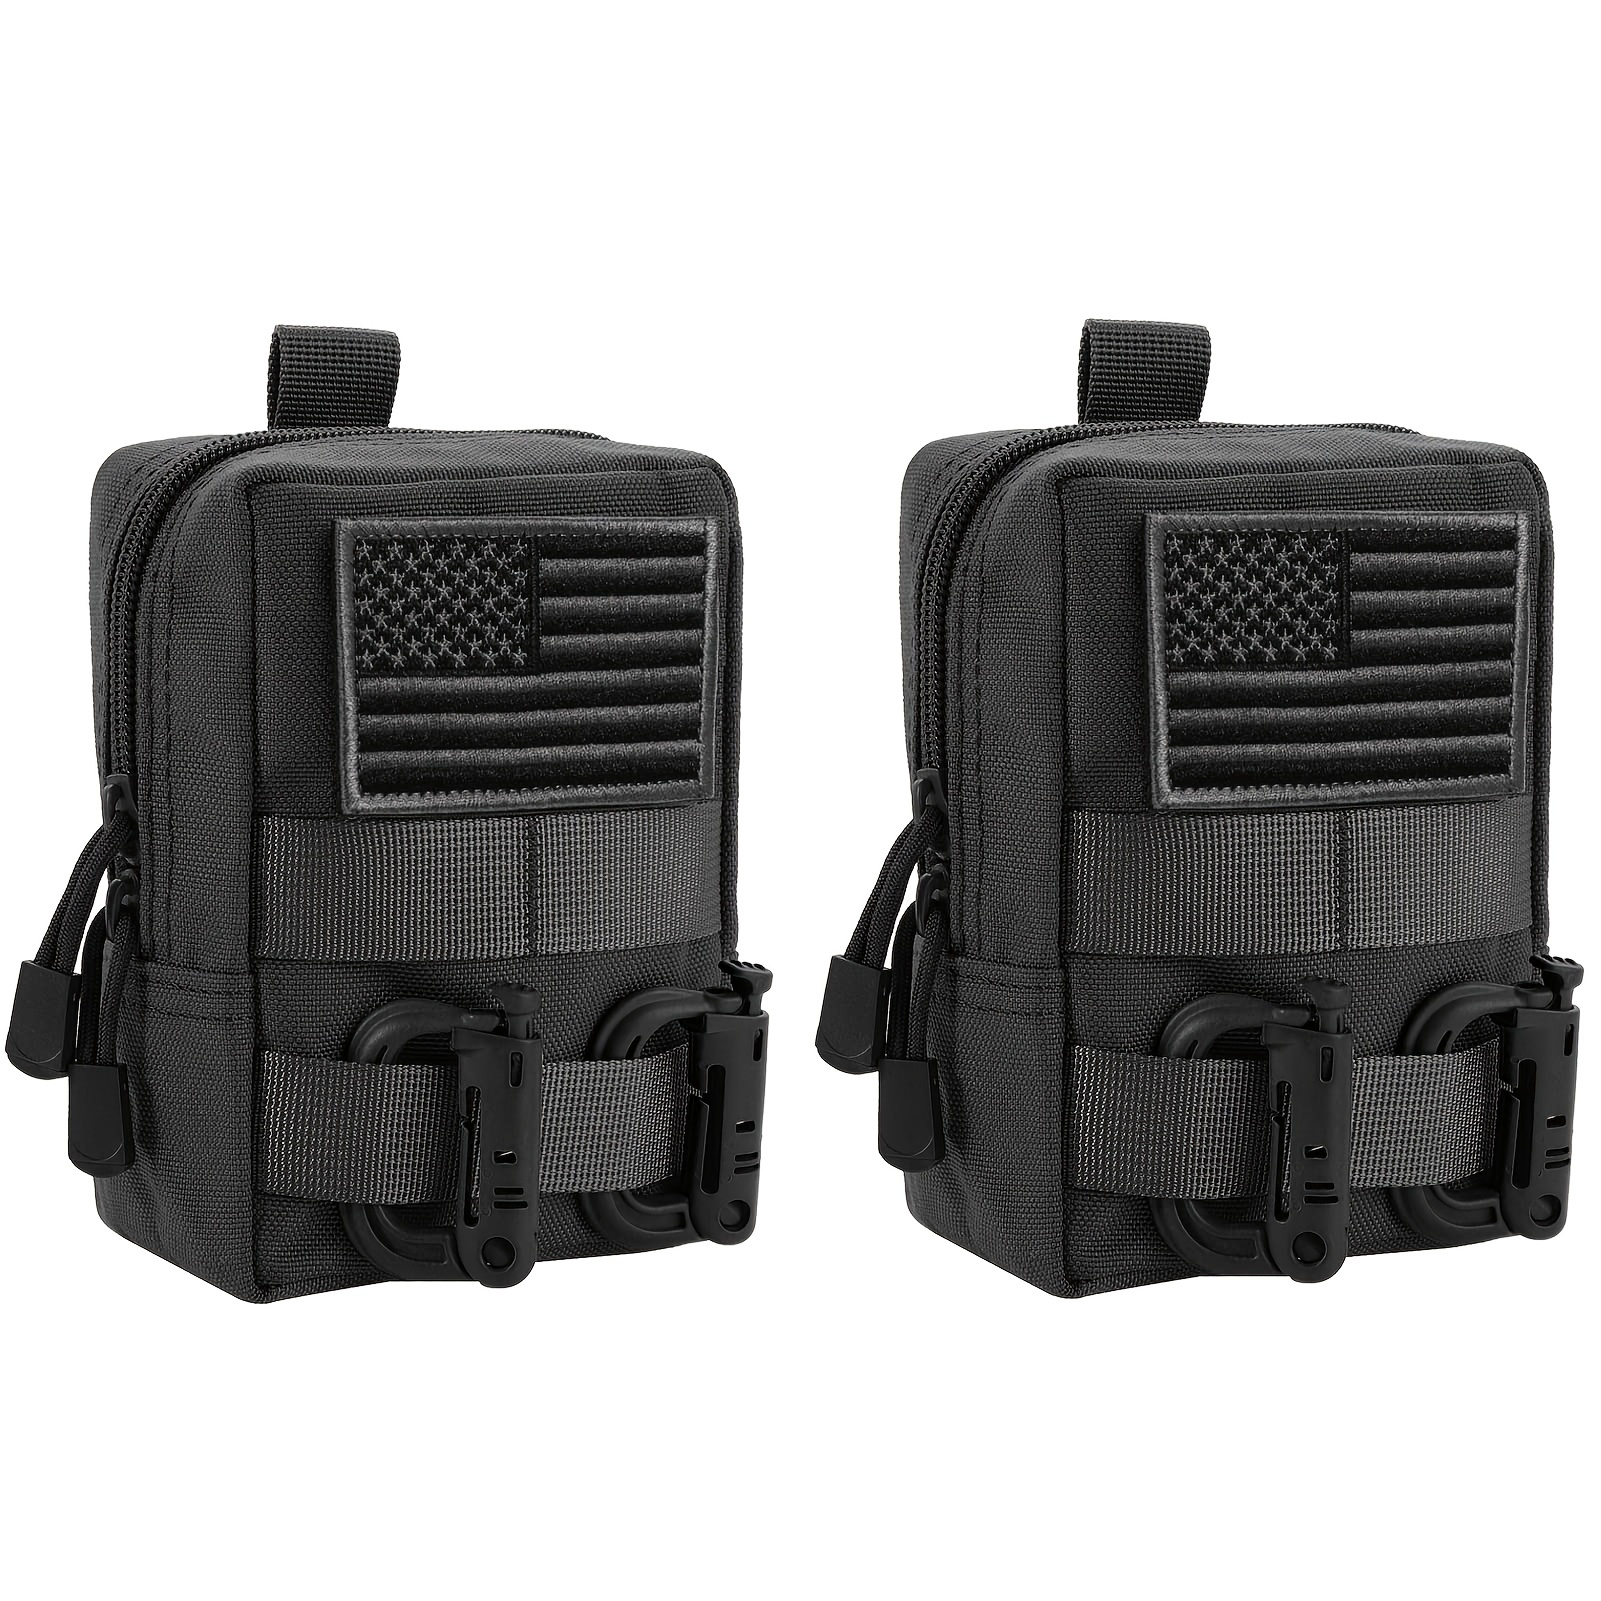 FUNANASUN 2 Pack Molle Pouches - Tactical Compact Water-Resistant EDC  Utility Pouch Bags